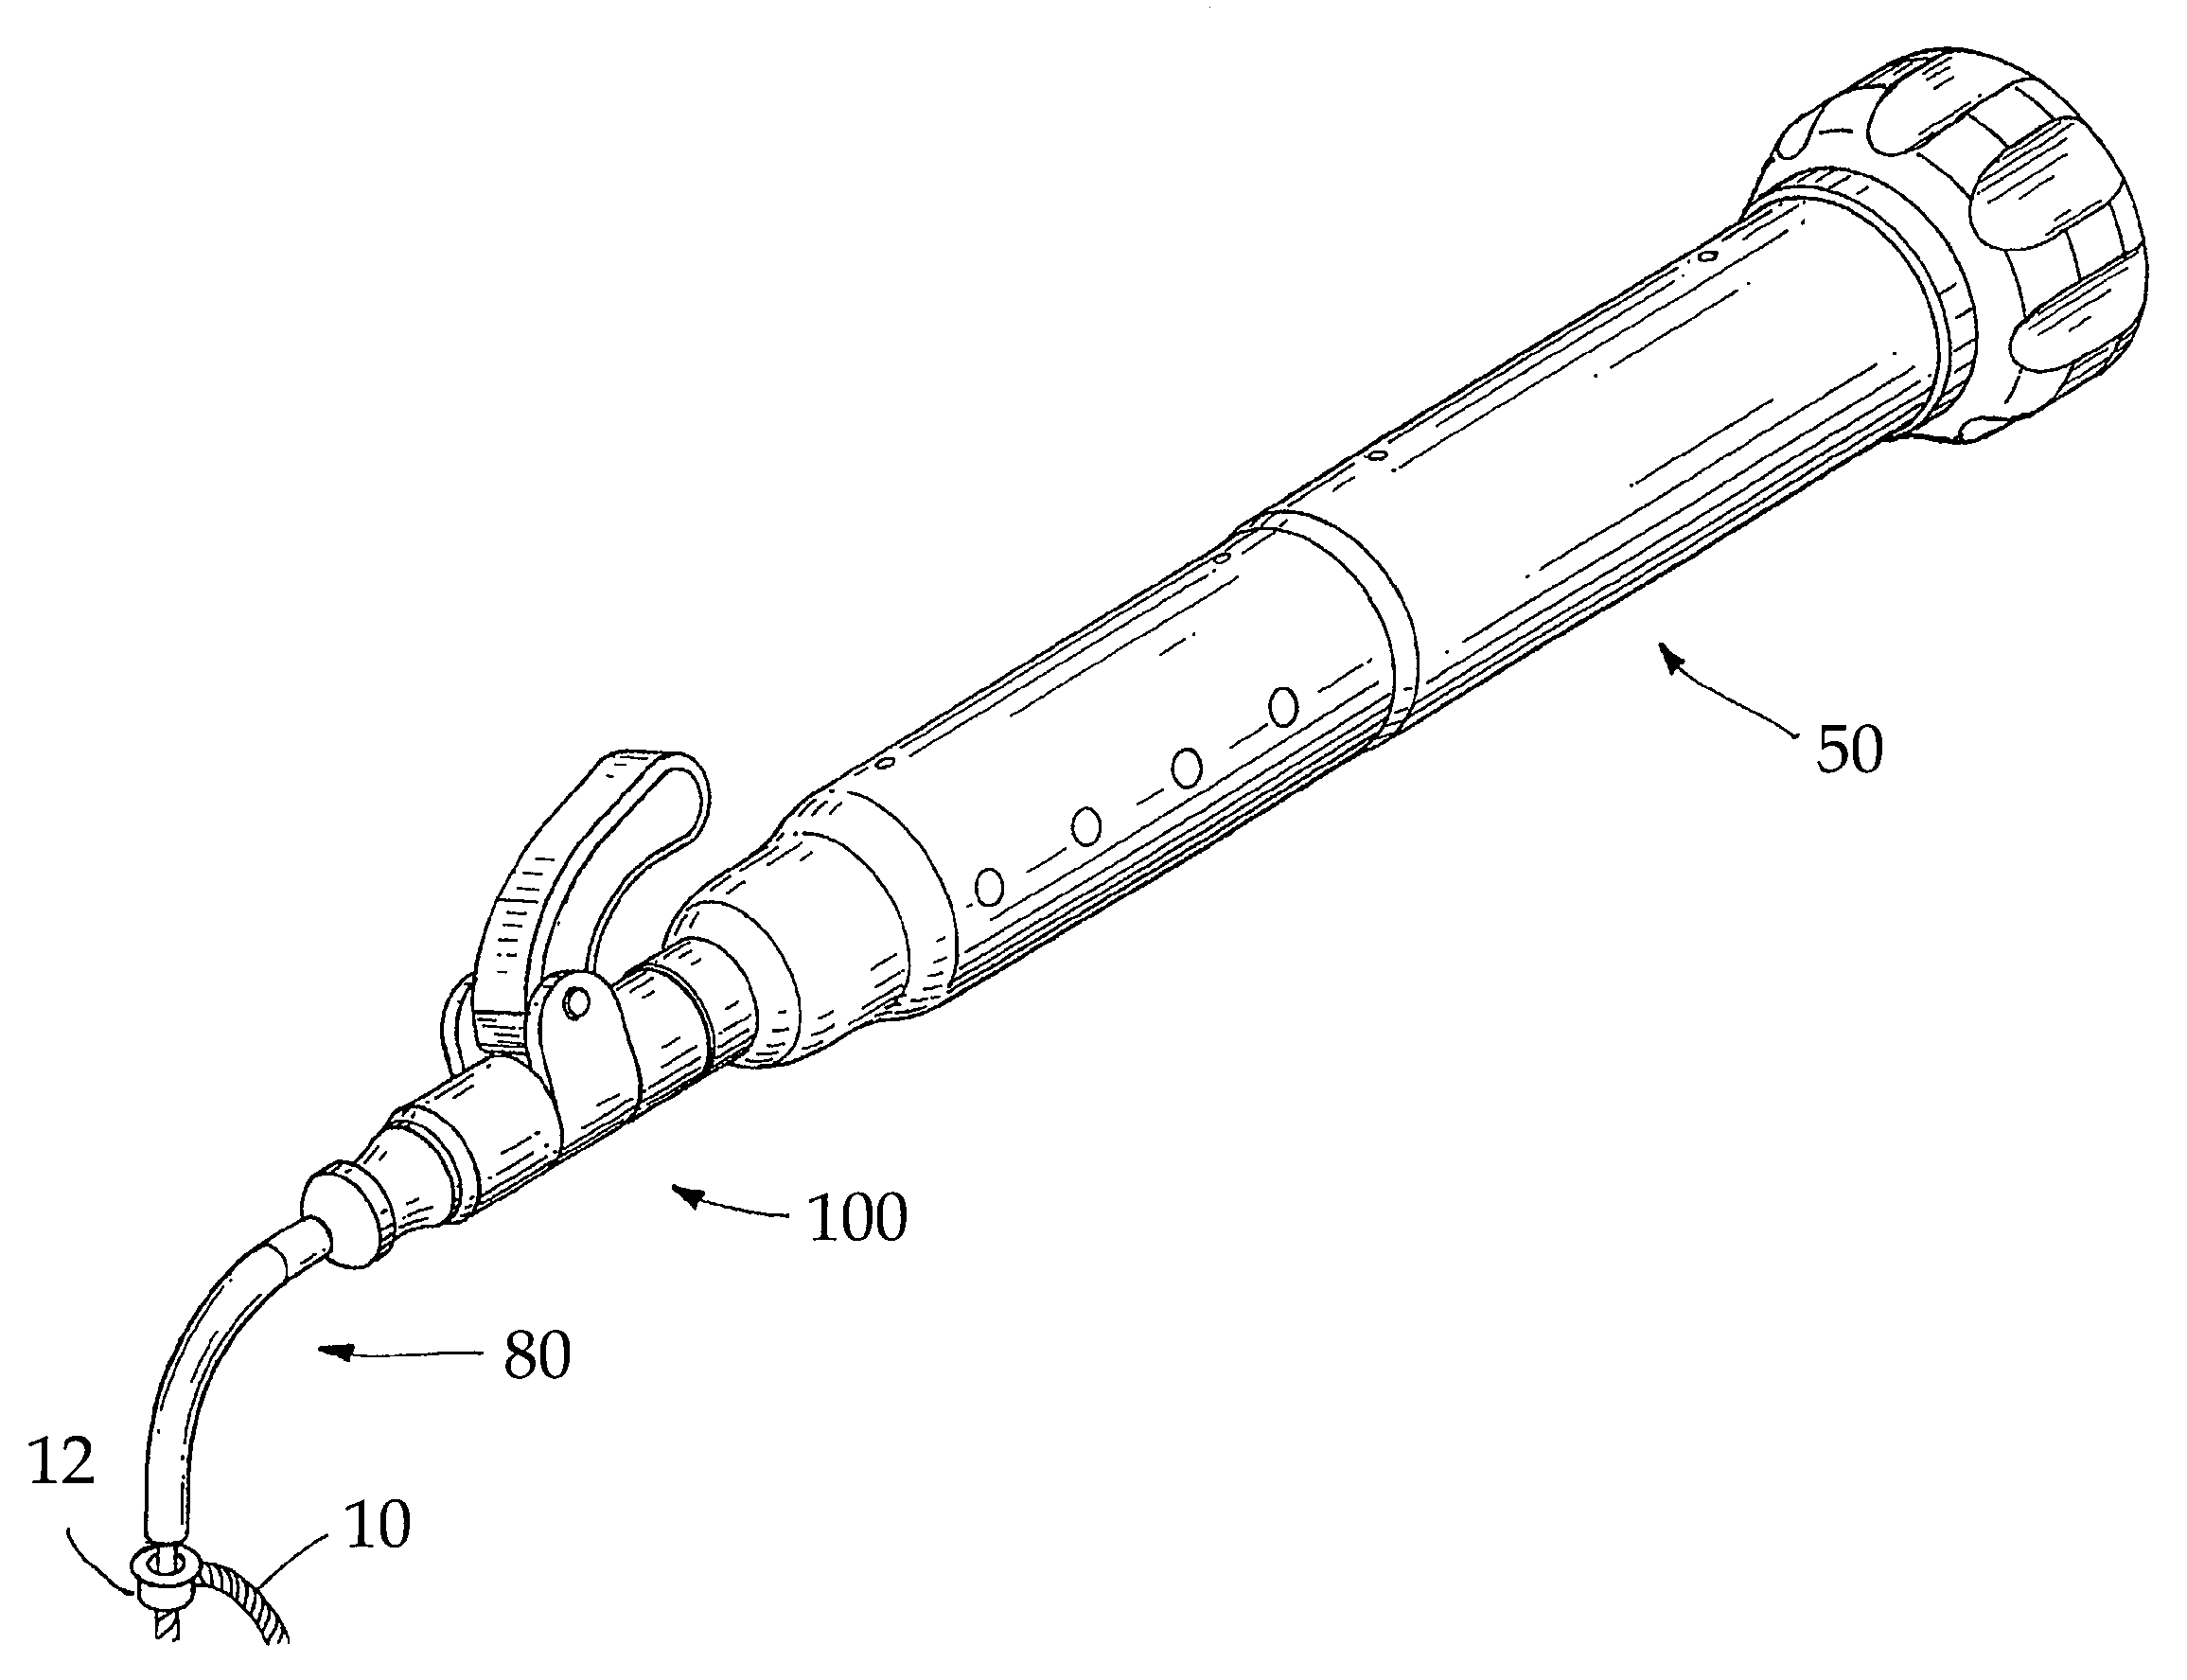 Method and apparatus for clamping surgical wires or cables